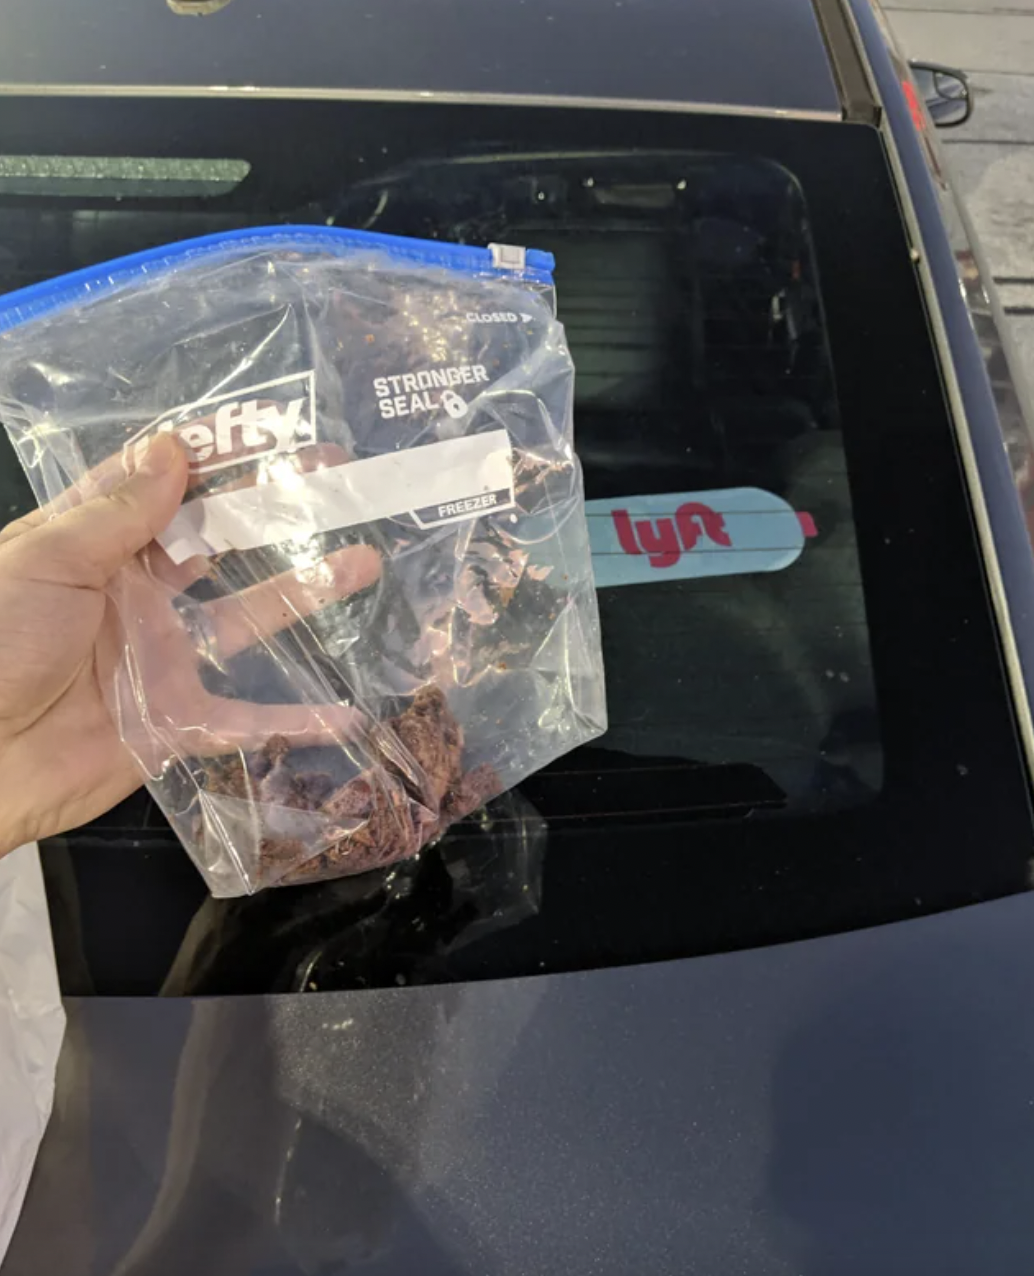 “Found this in my trunk while doing my pre-shift inspection.”